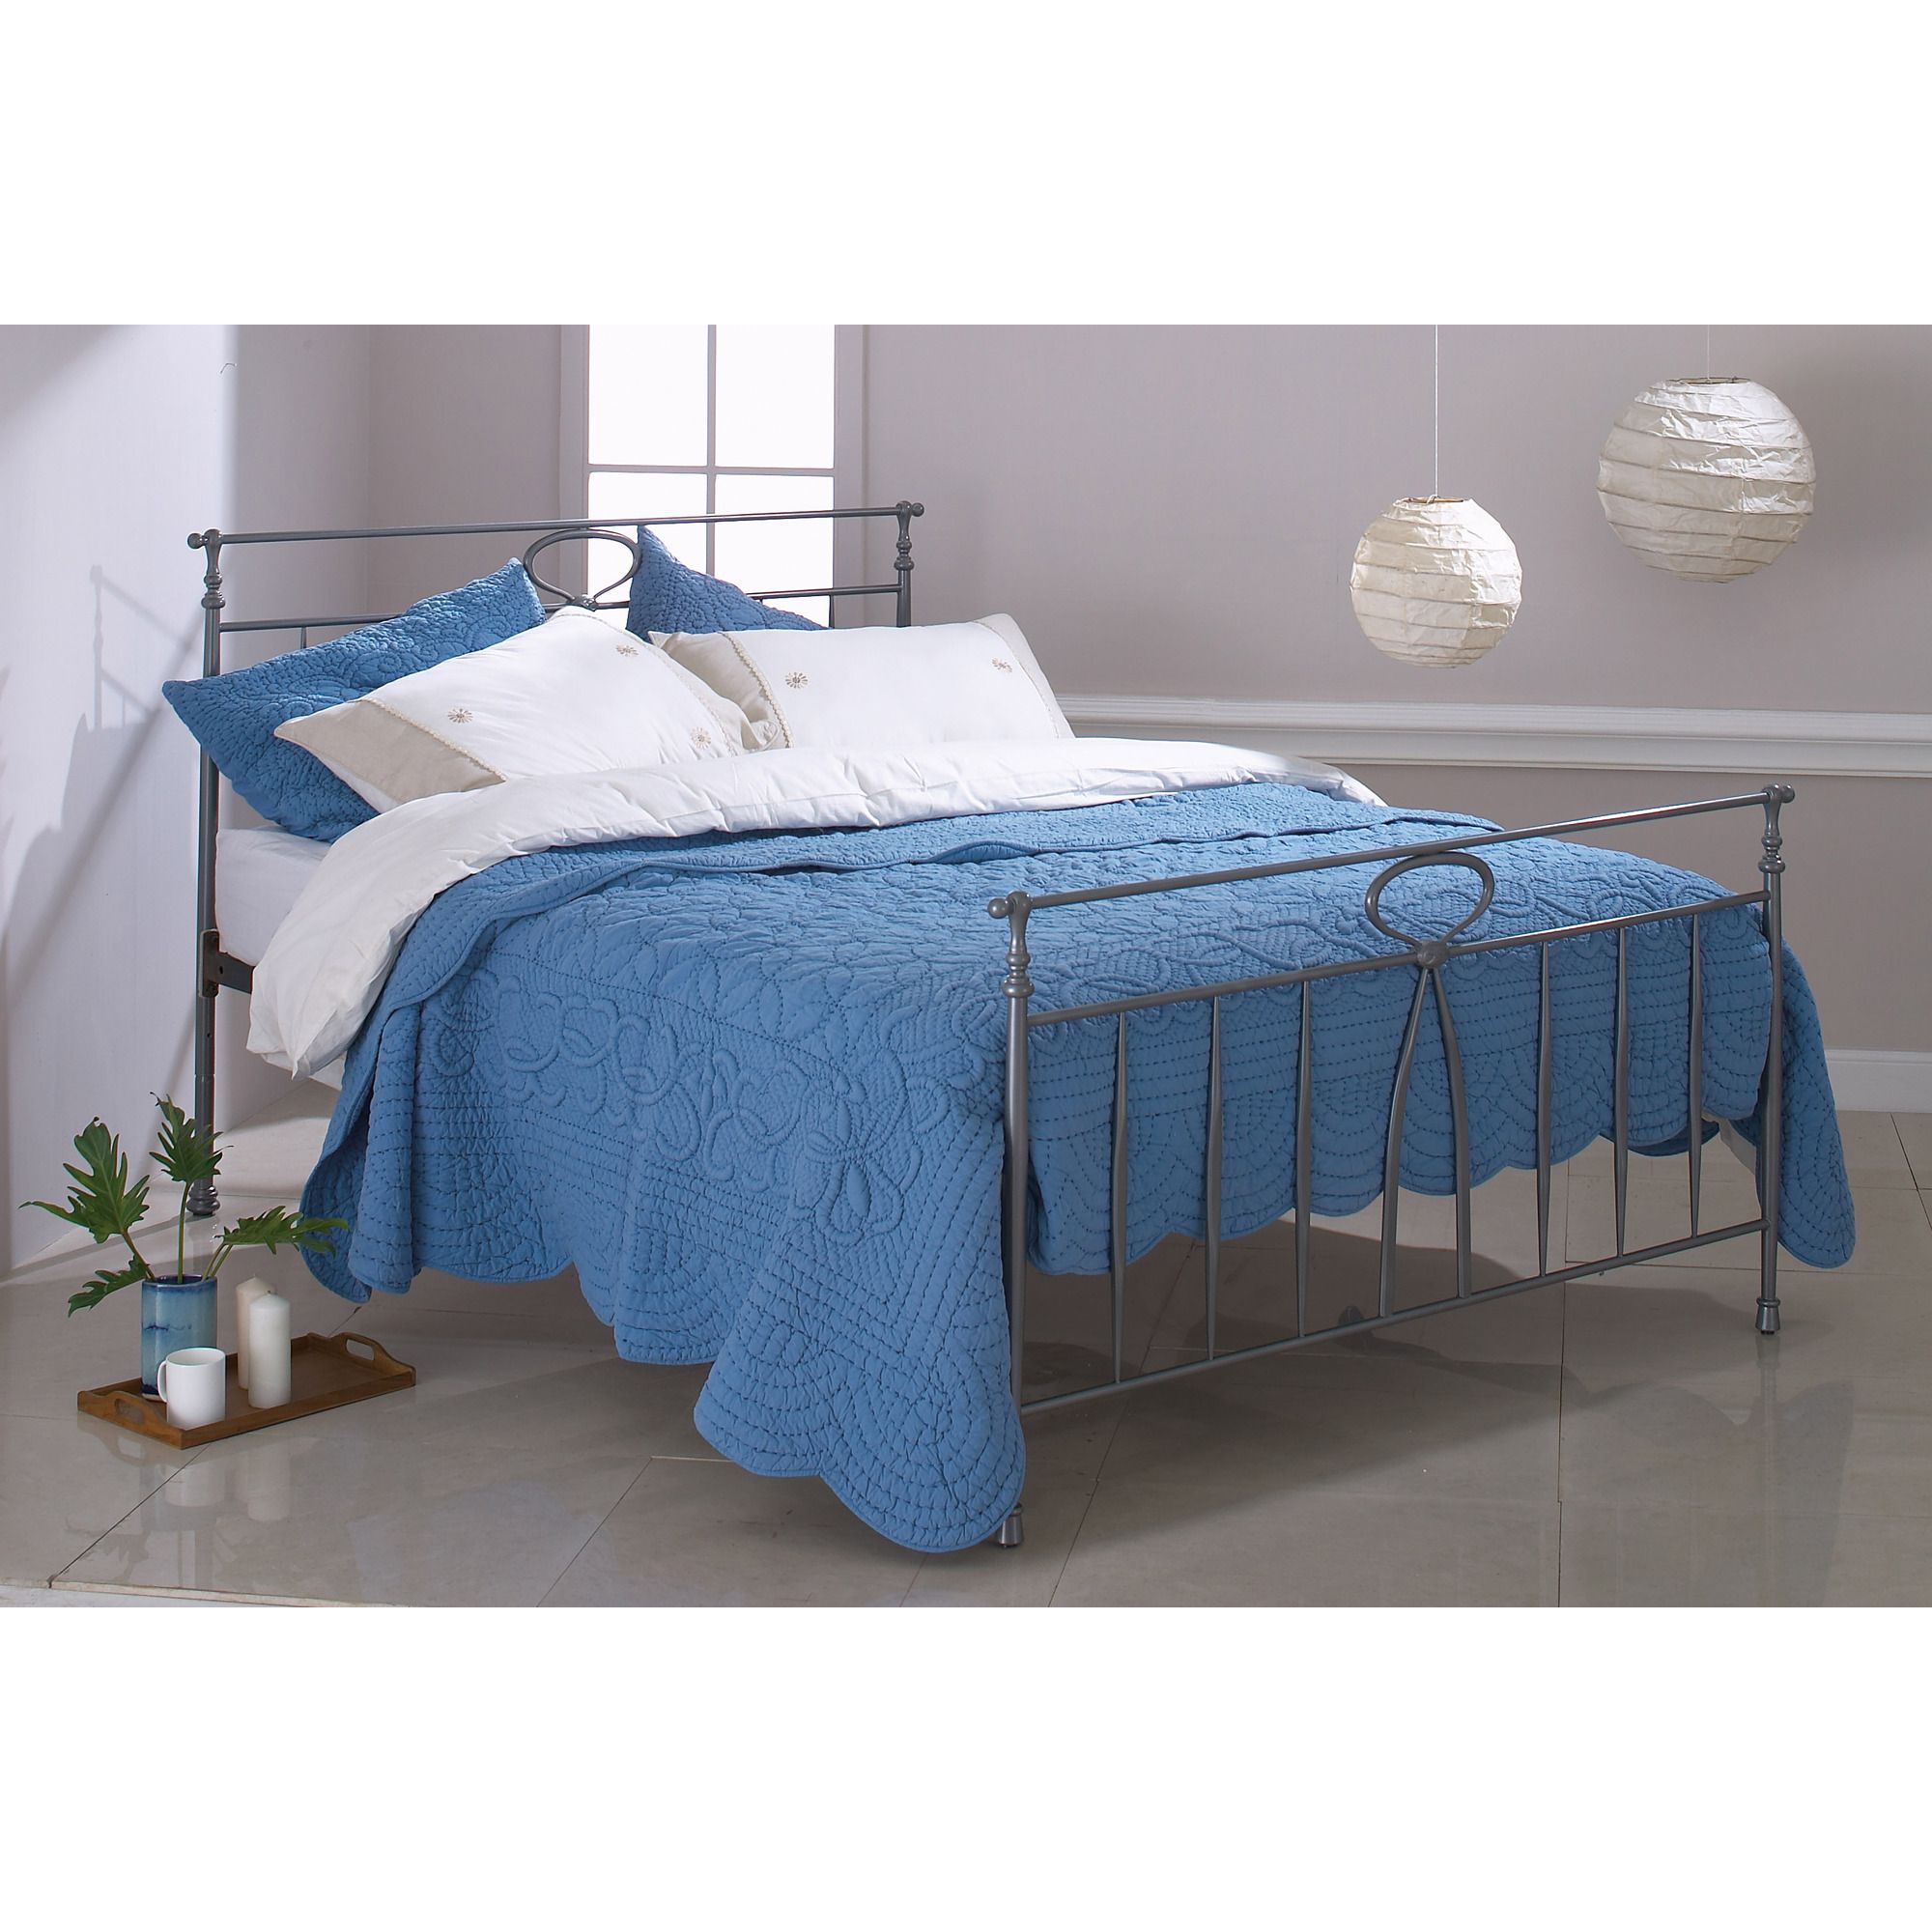 OBC Rora Bed Frame - Double - Glossy Charcoal at Tescos Direct